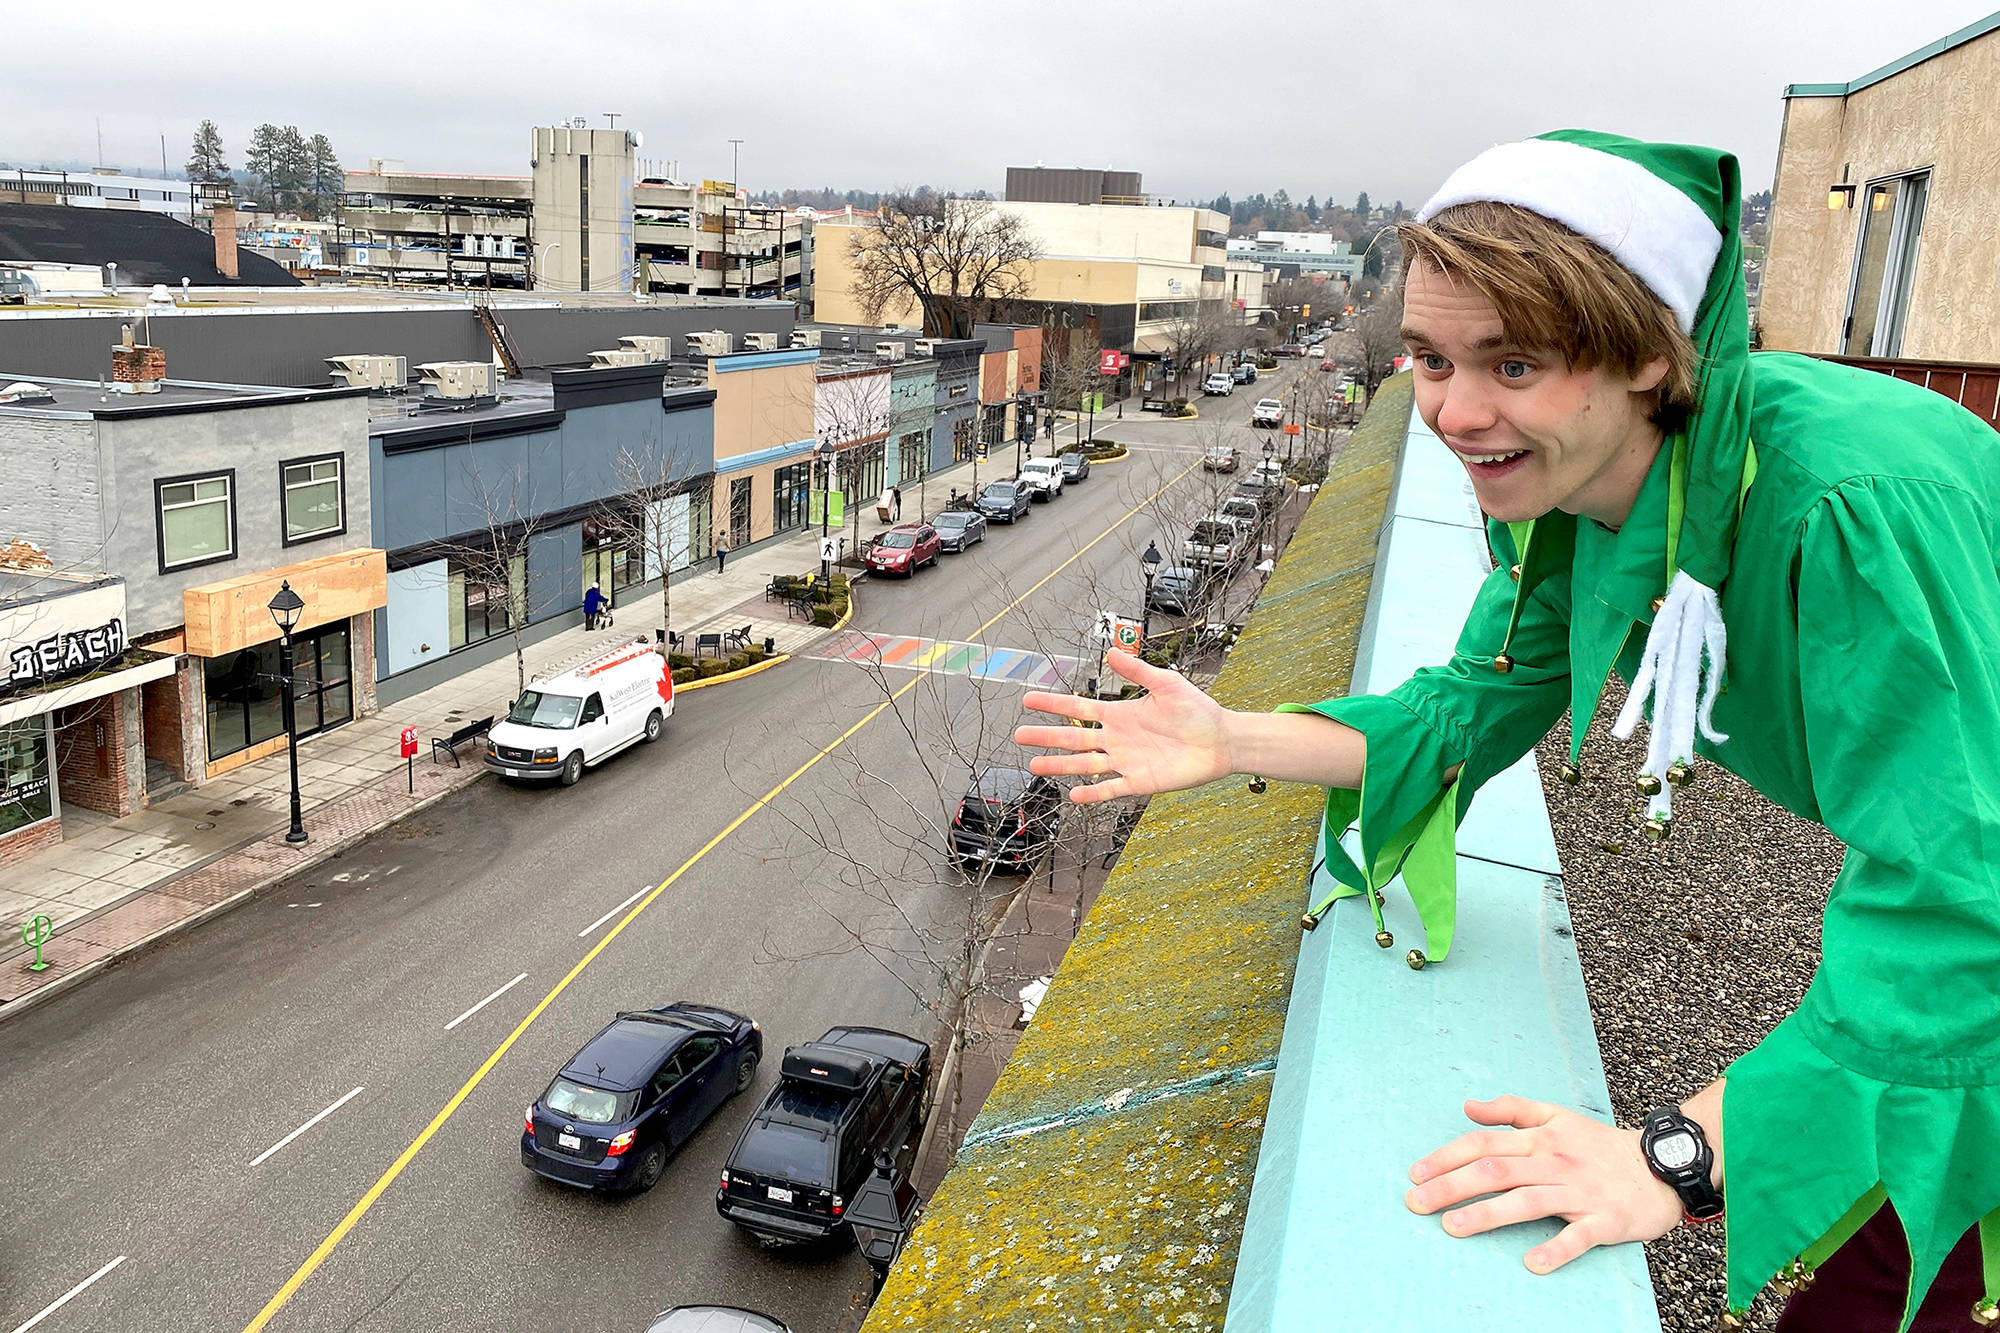 A Christmas elf has been seen and heard shouting from rooftops that Santa is coming to town Nov. 27. (Downtown Vernon Association photo)